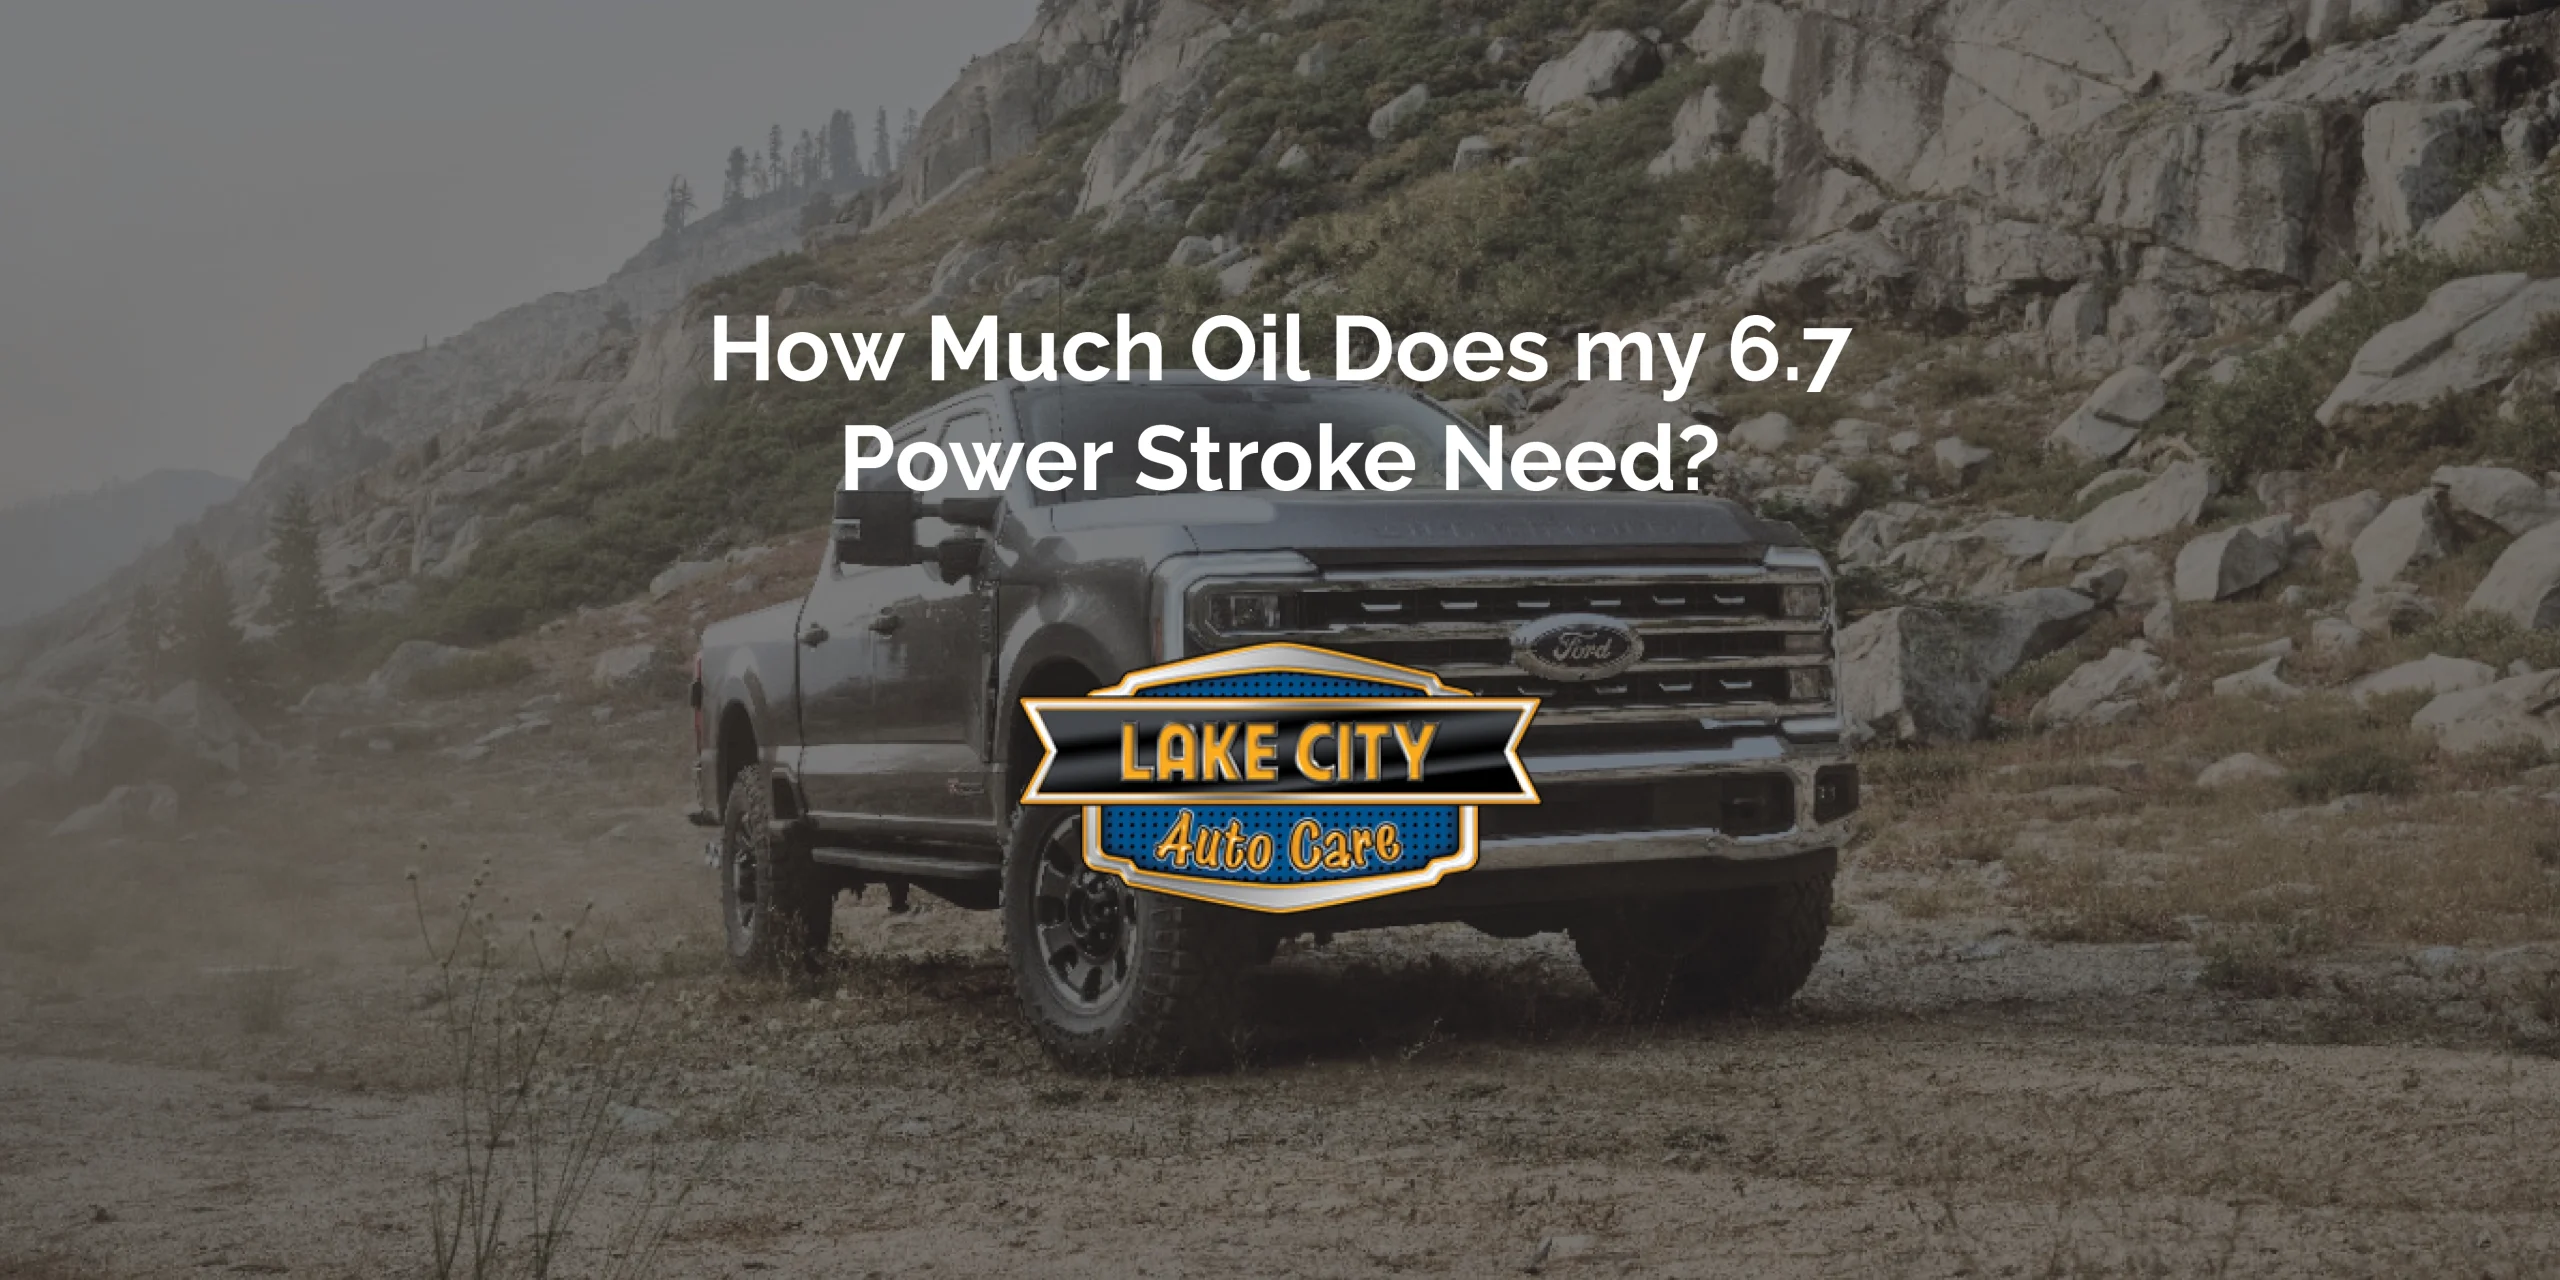 How Much Oil Does My 6.7 Power Stroke Need?